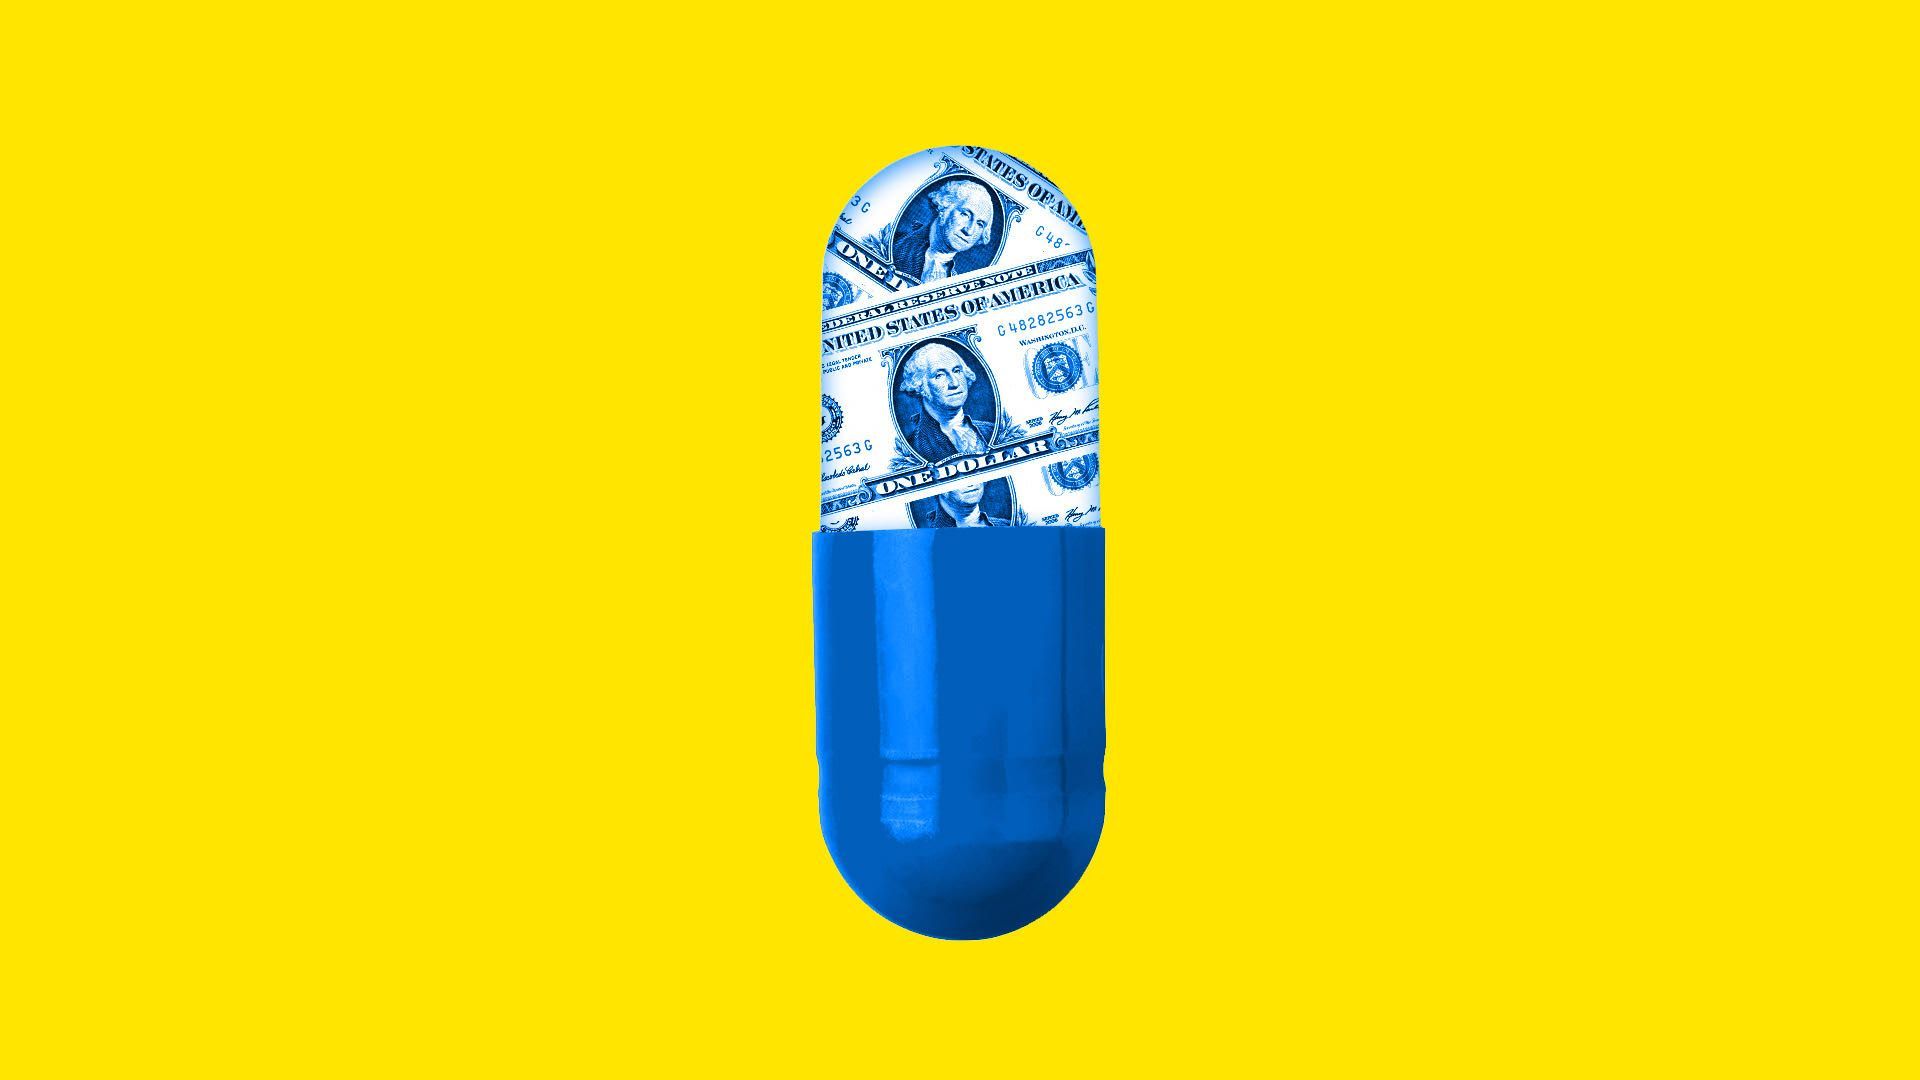 Illustration of a pill, half of which is dollar bills